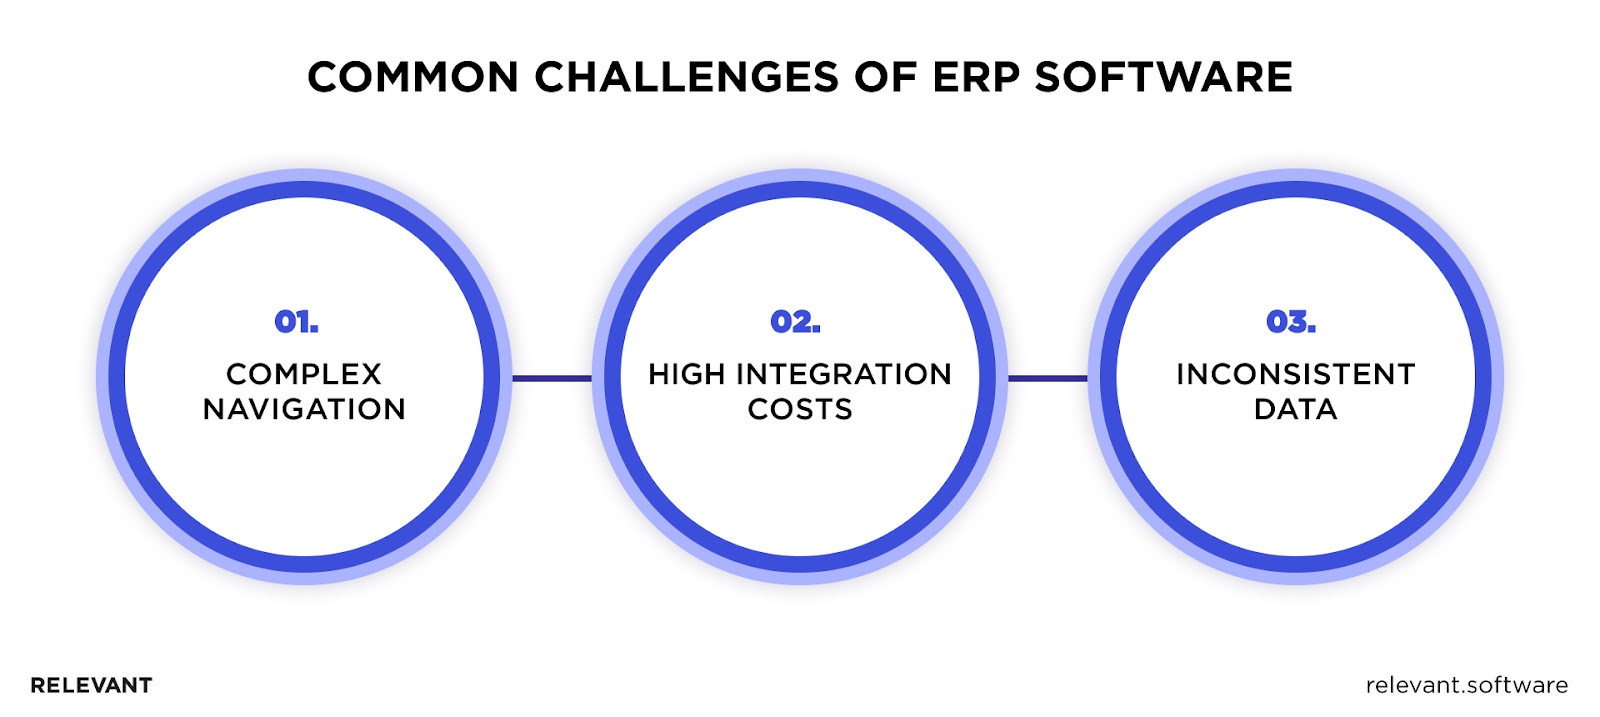 Common problems for ERP